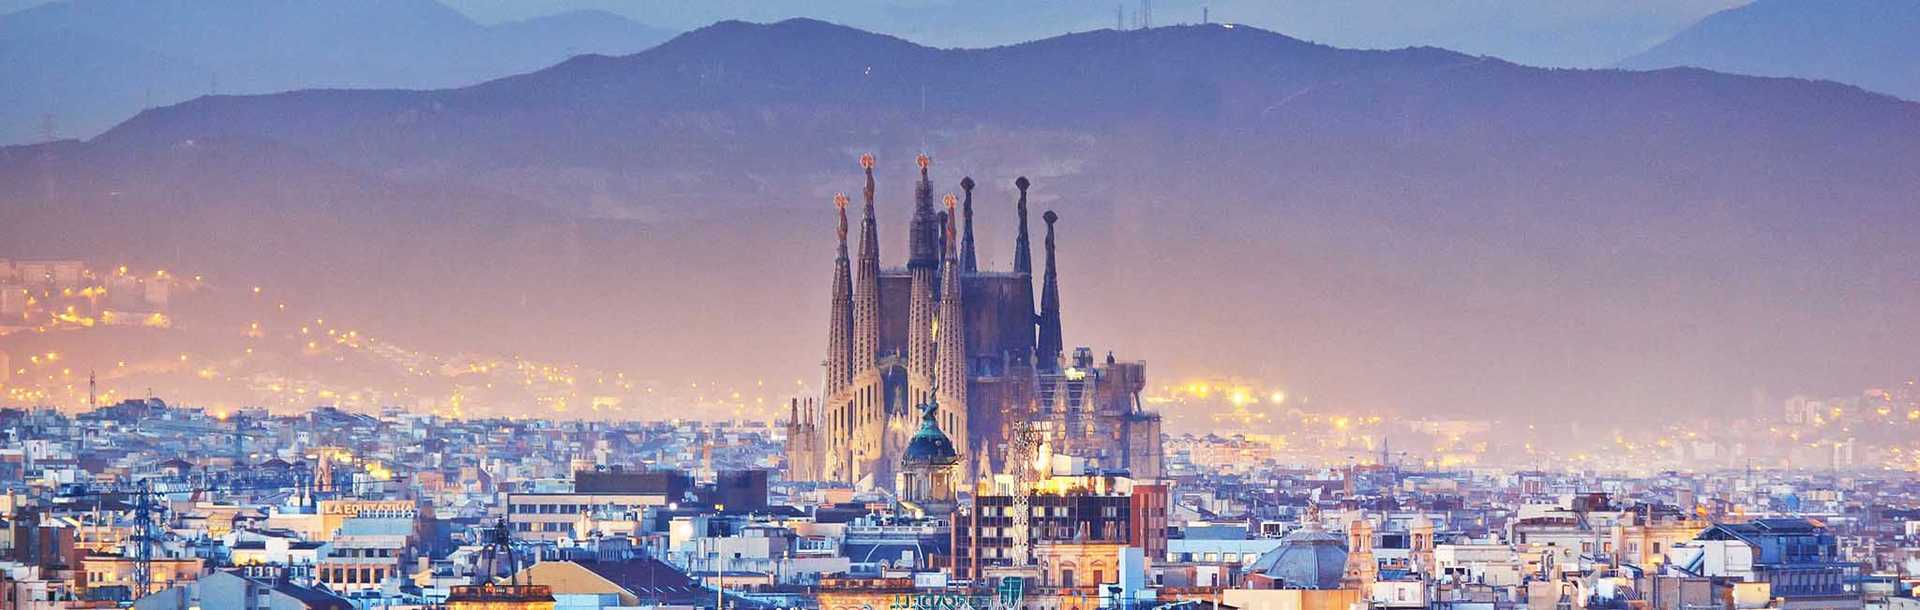 tours barcelona to madrid